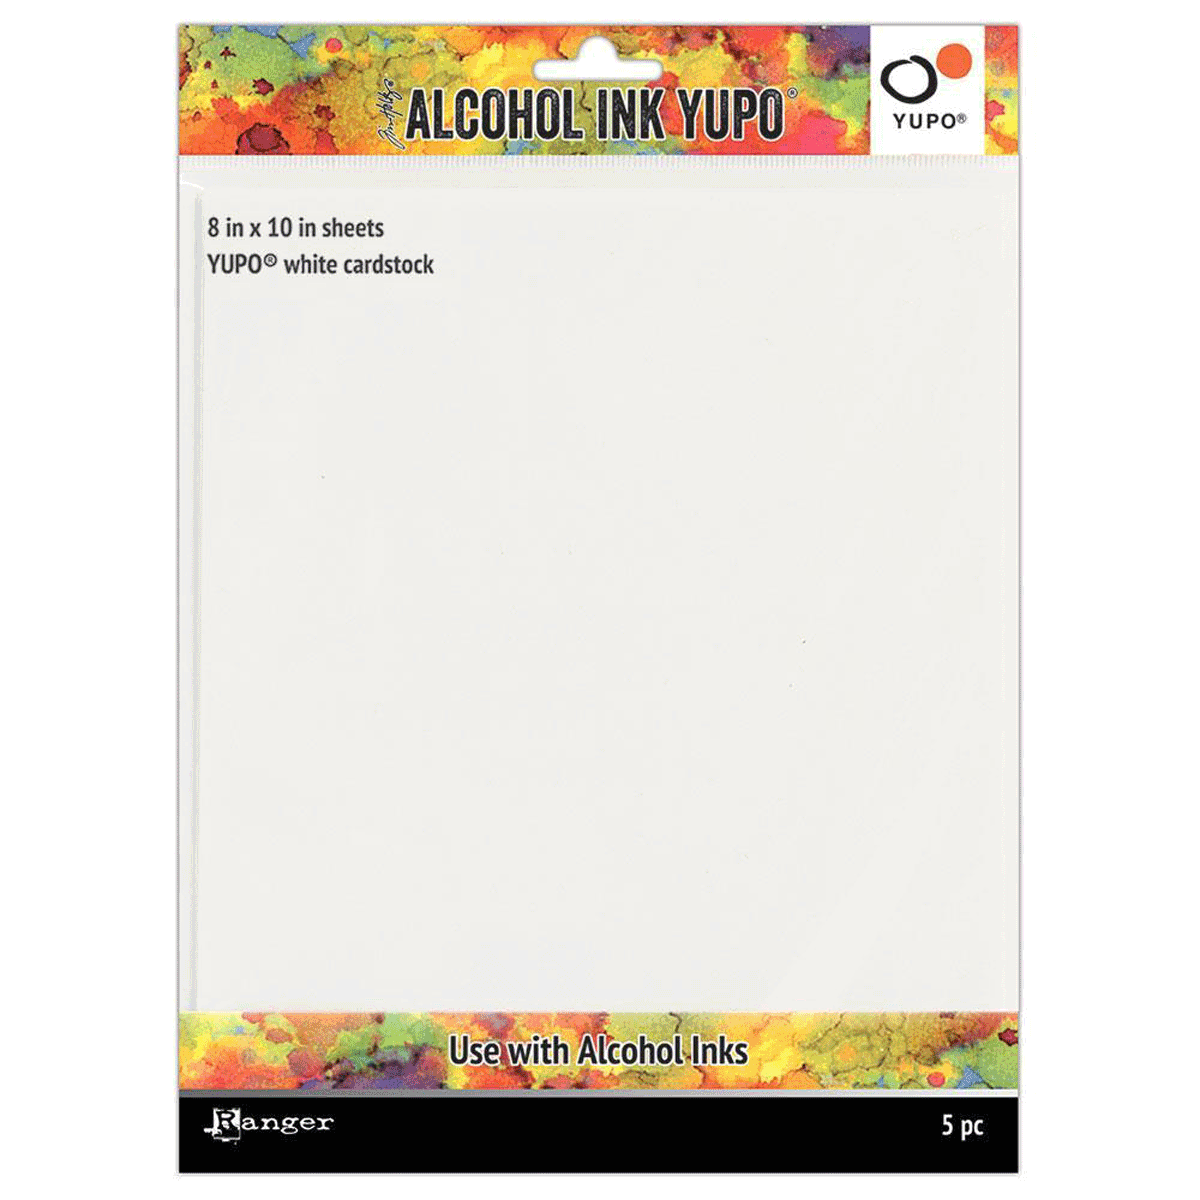 Tim Holtz Alcohol Ink Yupo (White cardstock) 8 x 10 in